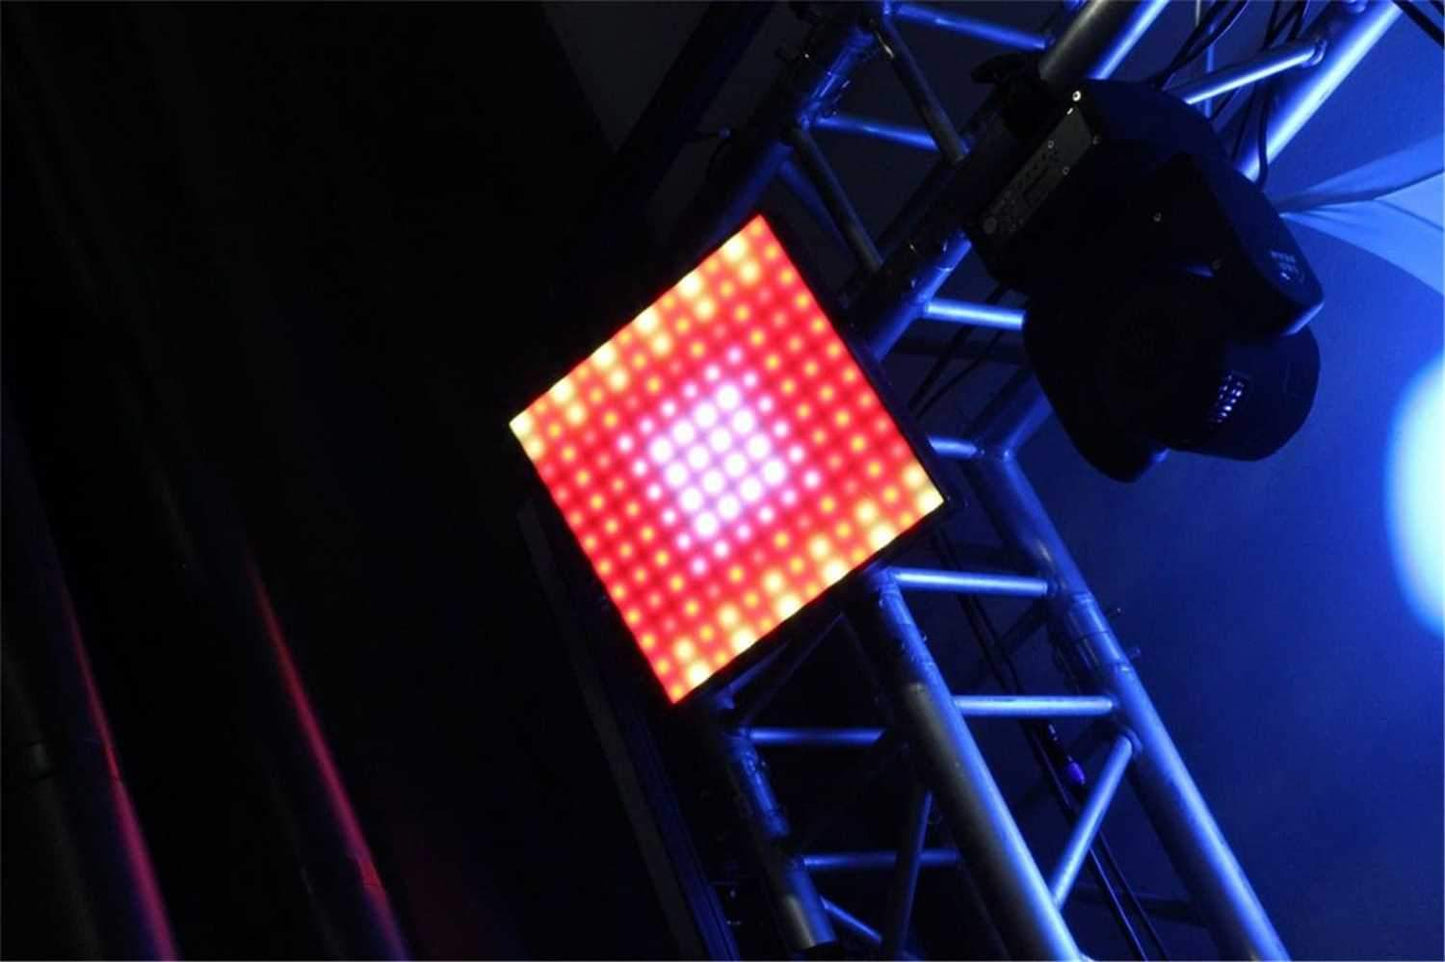 Blizzard Pixellicious Squared RGB LED Panel Light - PSSL ProSound and Stage Lighting